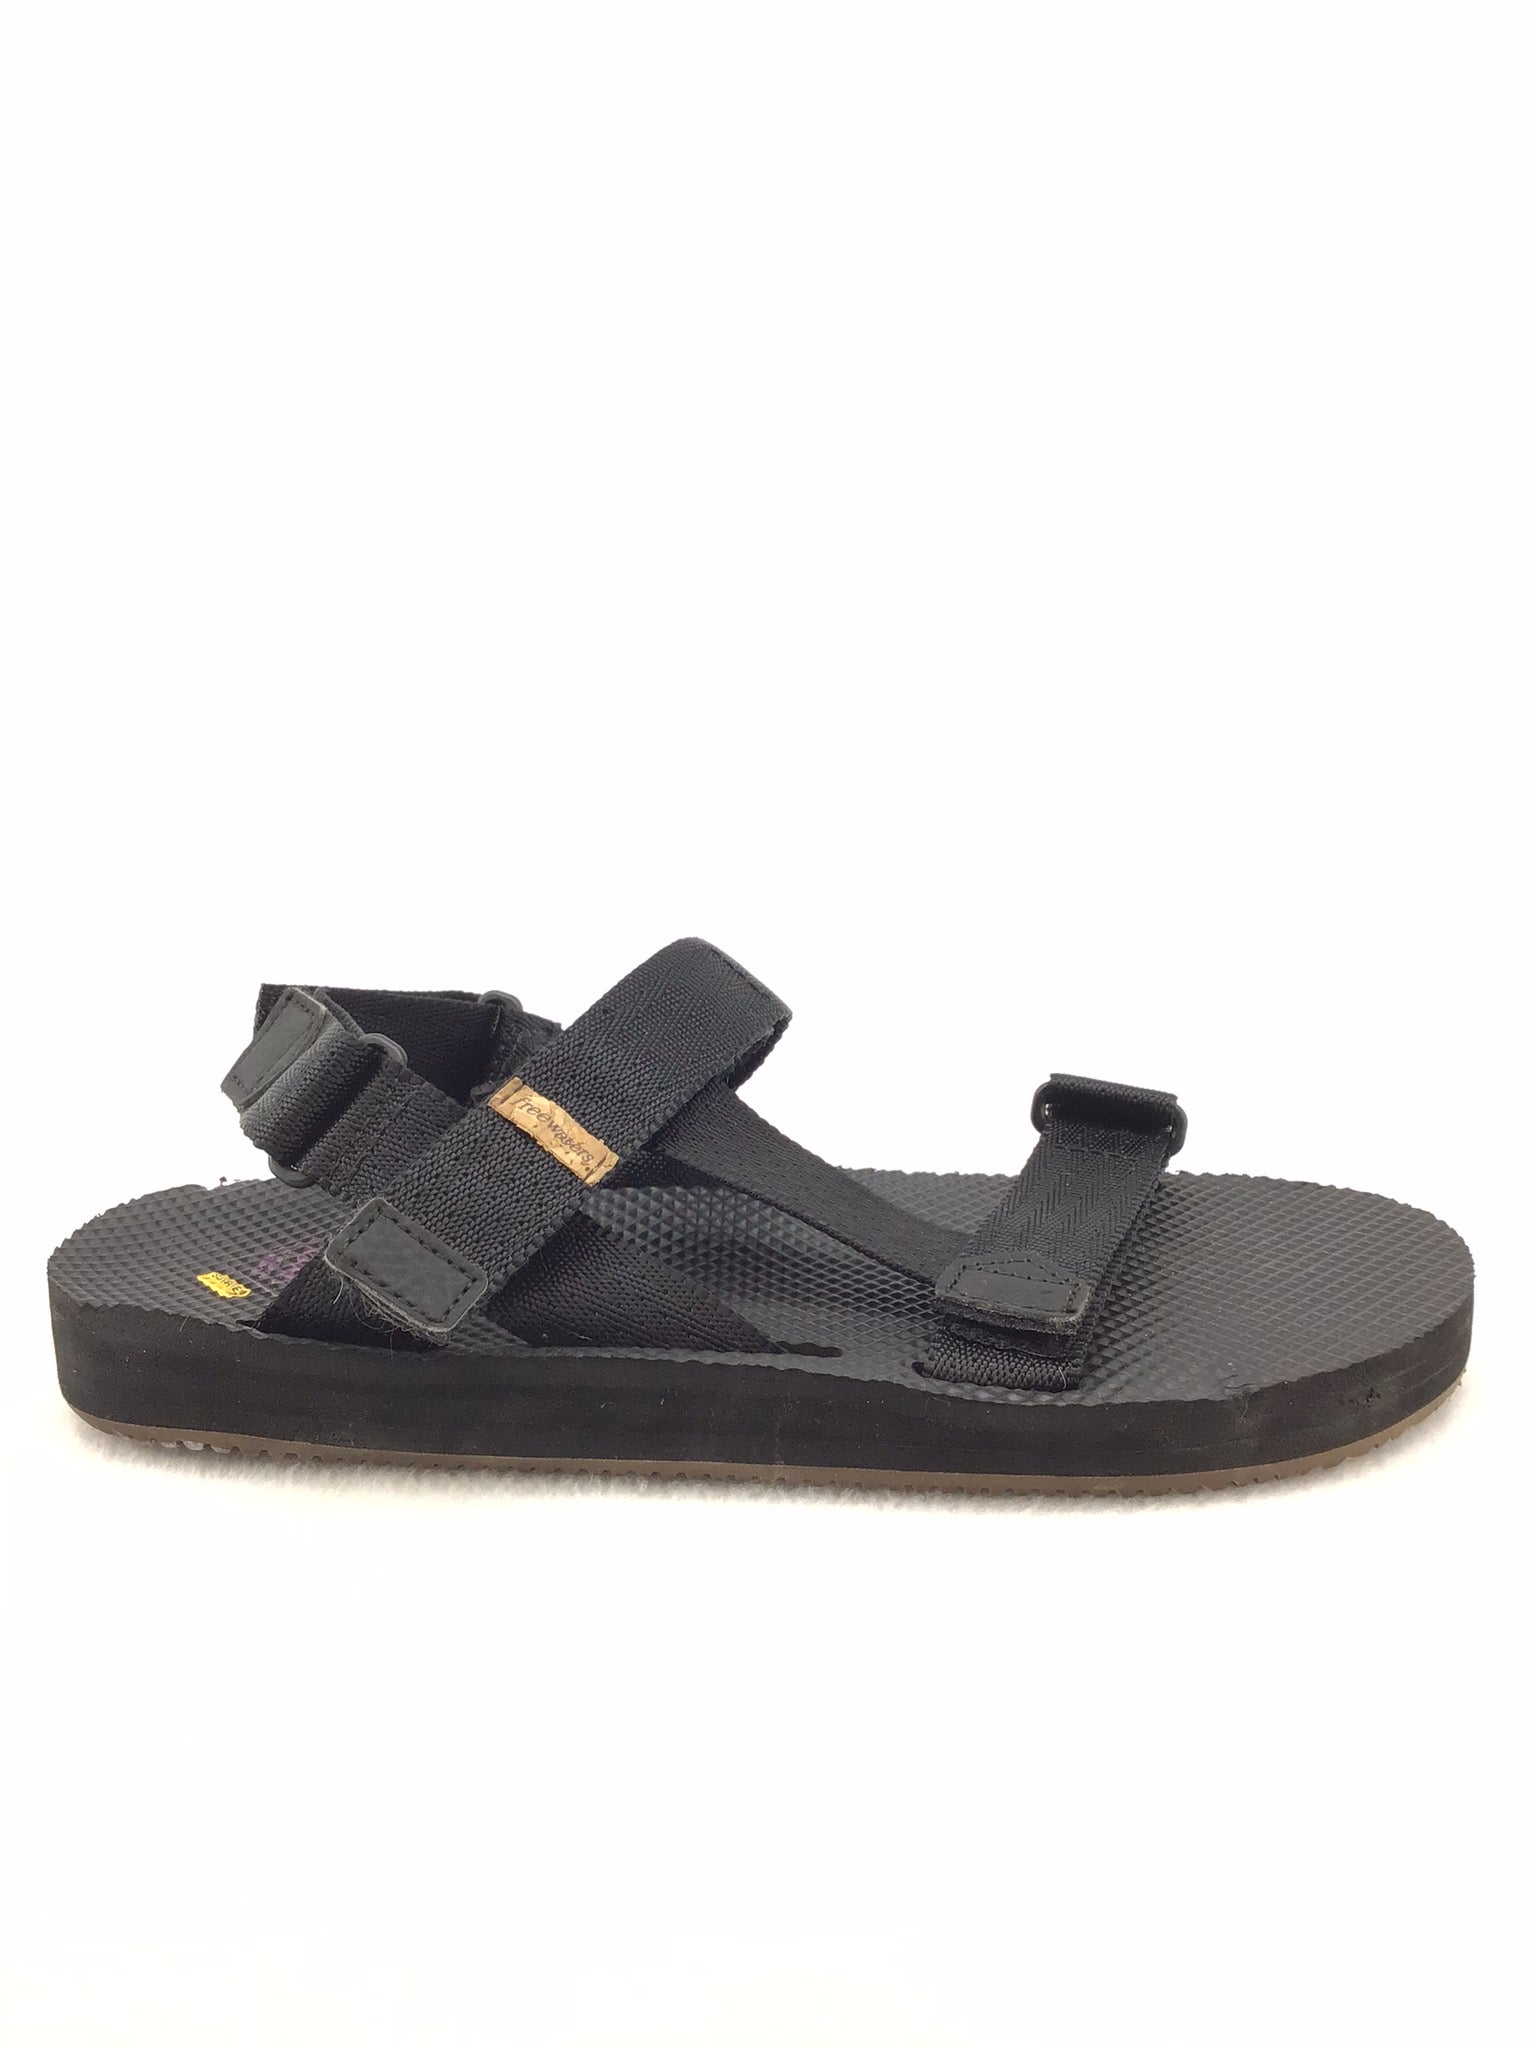 Freewaters Sandals Size 9